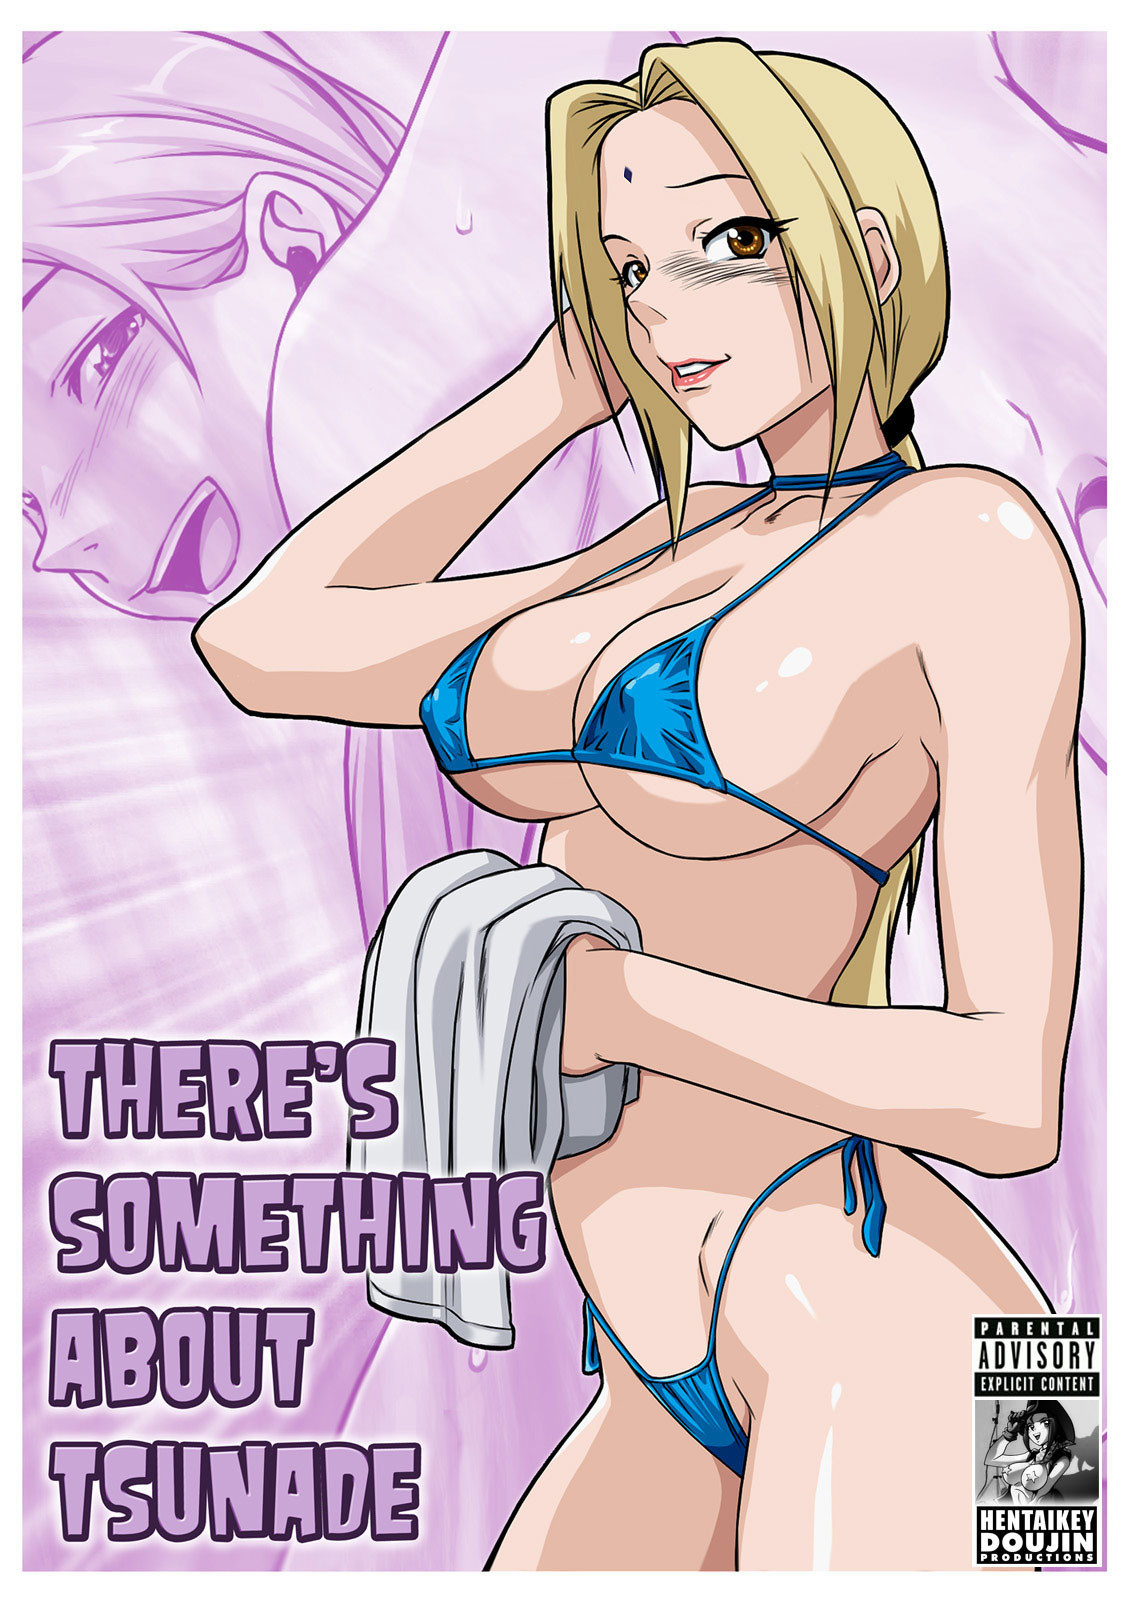 6689347 main There is something about Tsunade 01